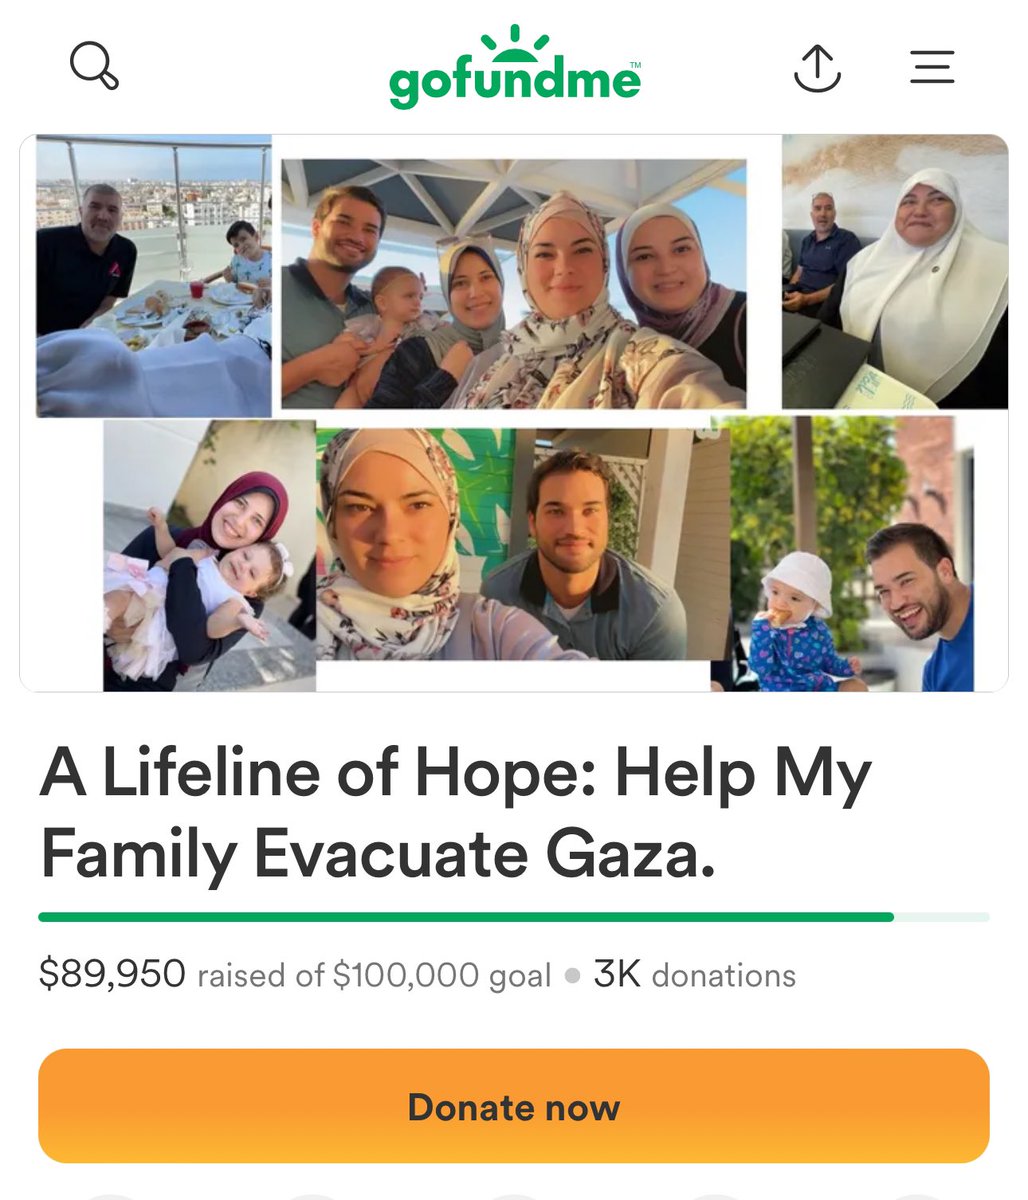 I am blown away by how many donations we’ve made in less than 24 hours. Enas said yesterday was one of the worst days of her life before everyone came through to help her family. This collective effort is amazing. Can we hit this goal today?! Donate now! gofund.me/1b36ac06